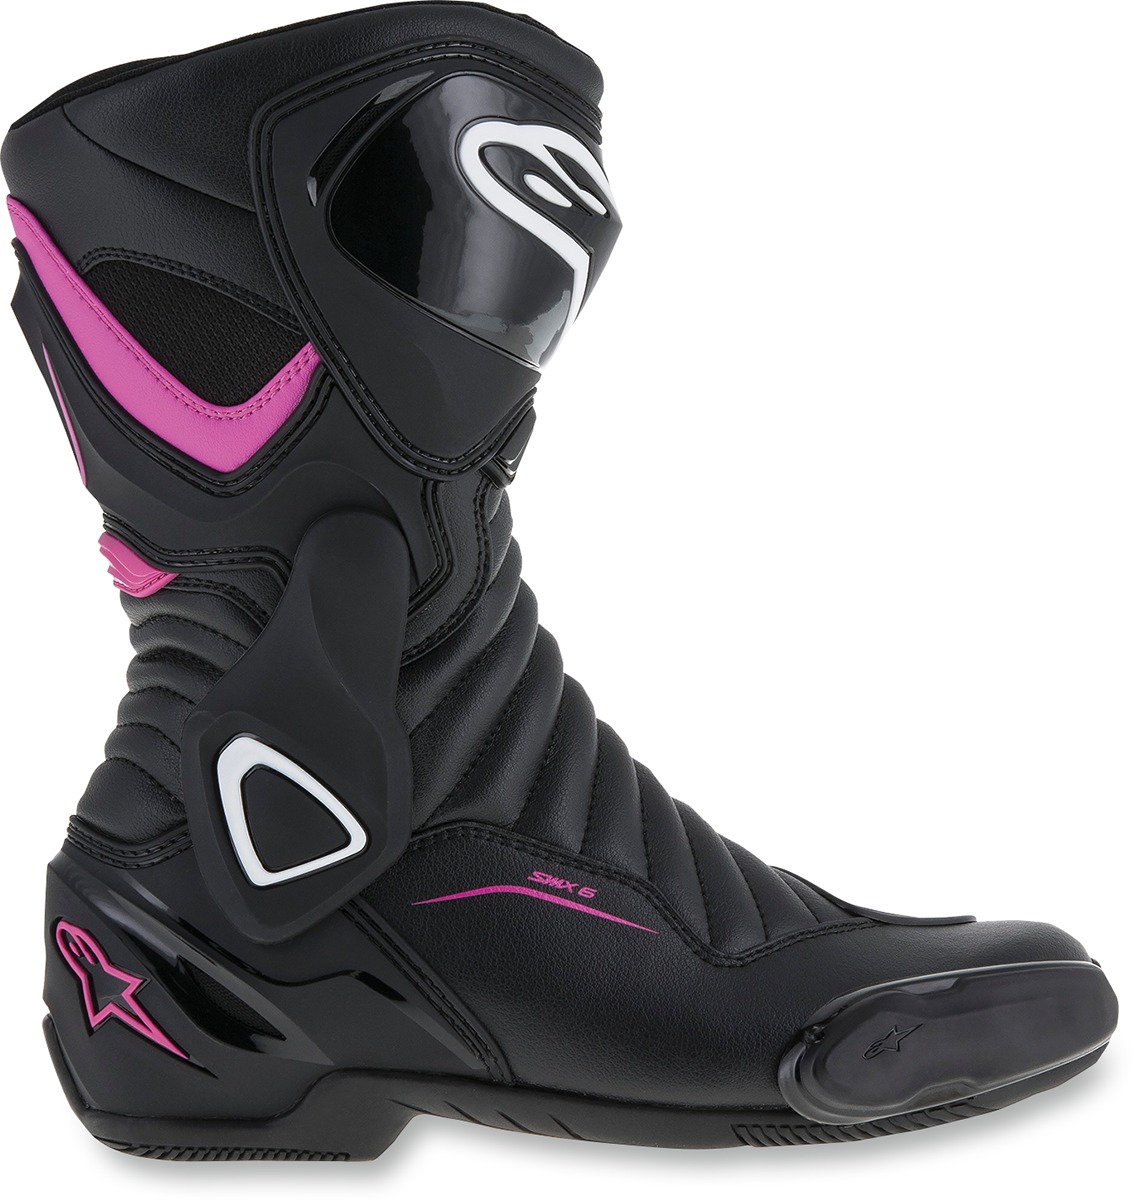 Women's SMX6 Vented Street Riding Boots Black/Pink/White US 8.5 - Click Image to Close